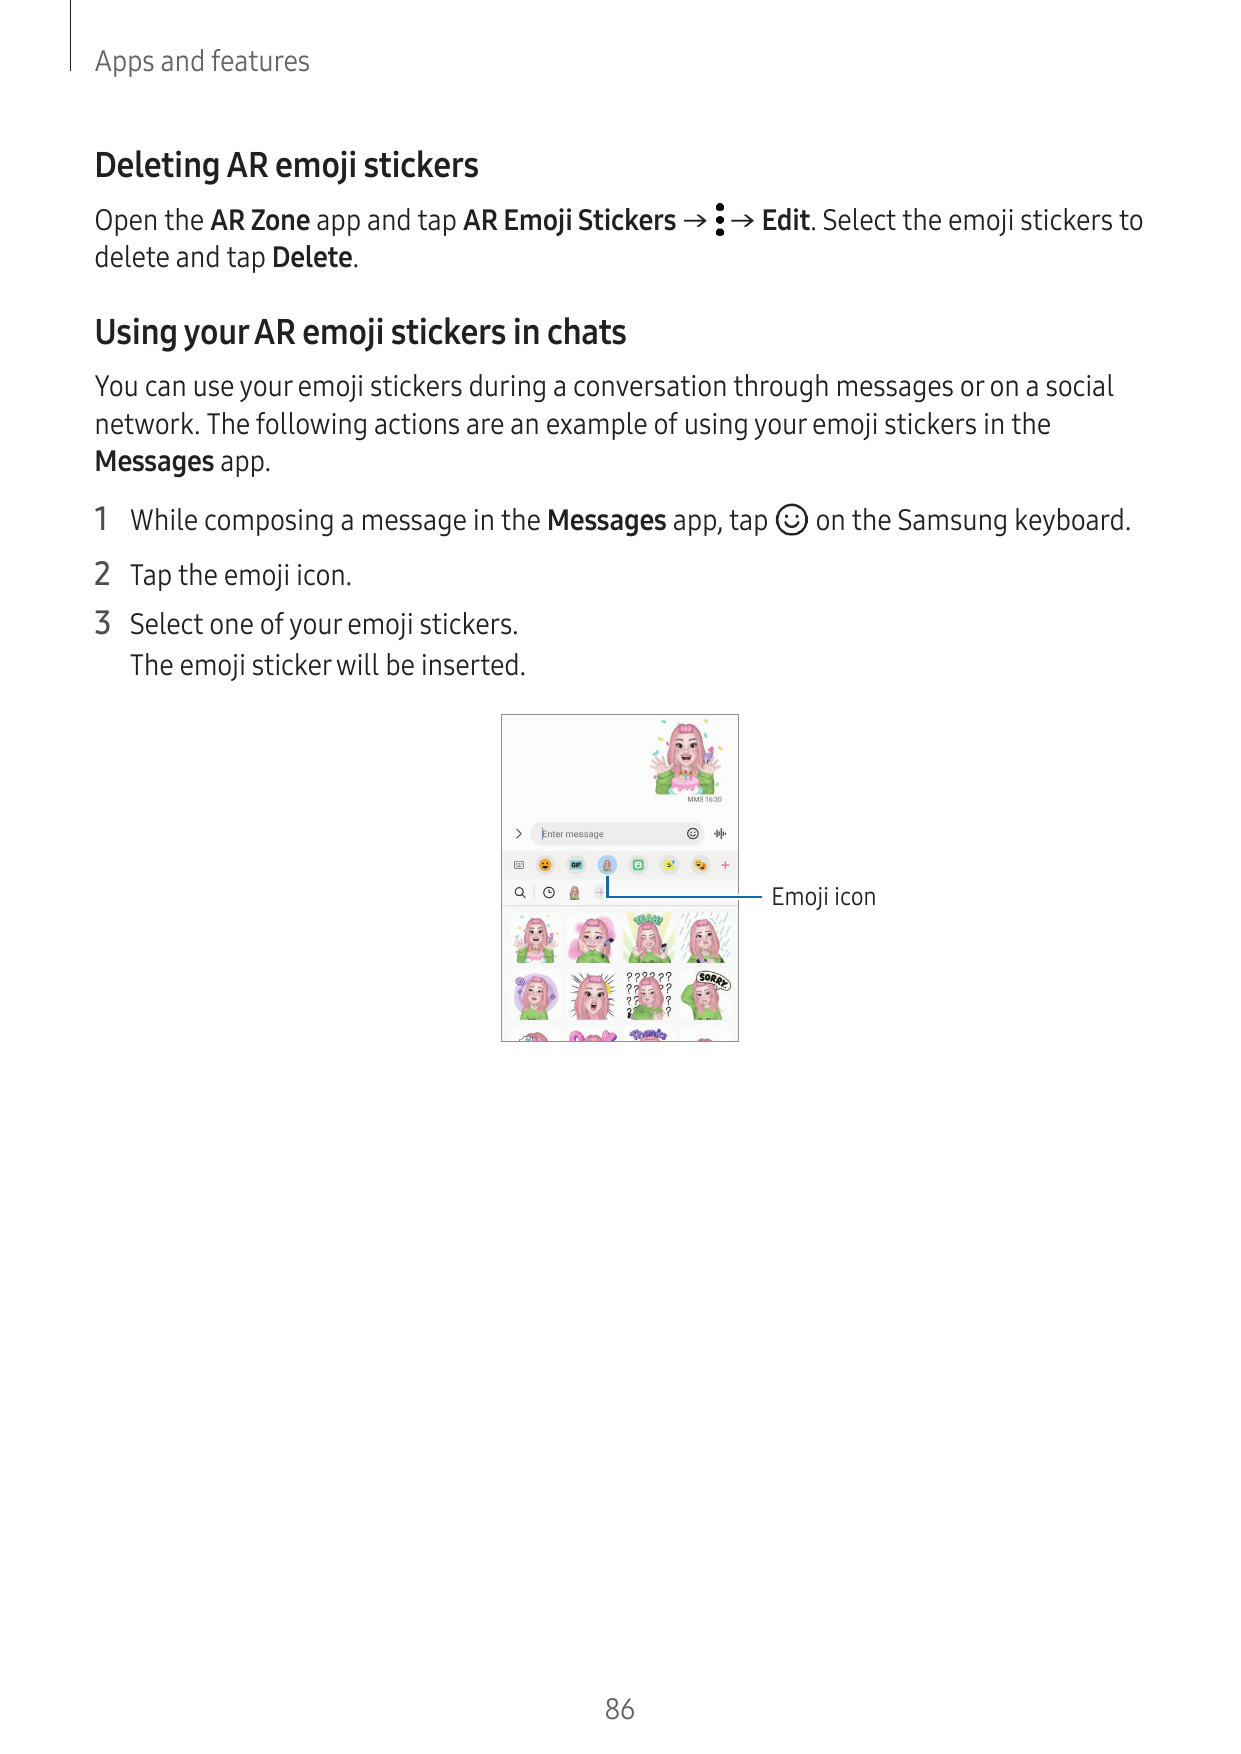 Apps and featuresDeleting AR emoji stickersOpen the AR Zone app and tap AR Emoji Stickers → → Edit. Select the emoji stickers to